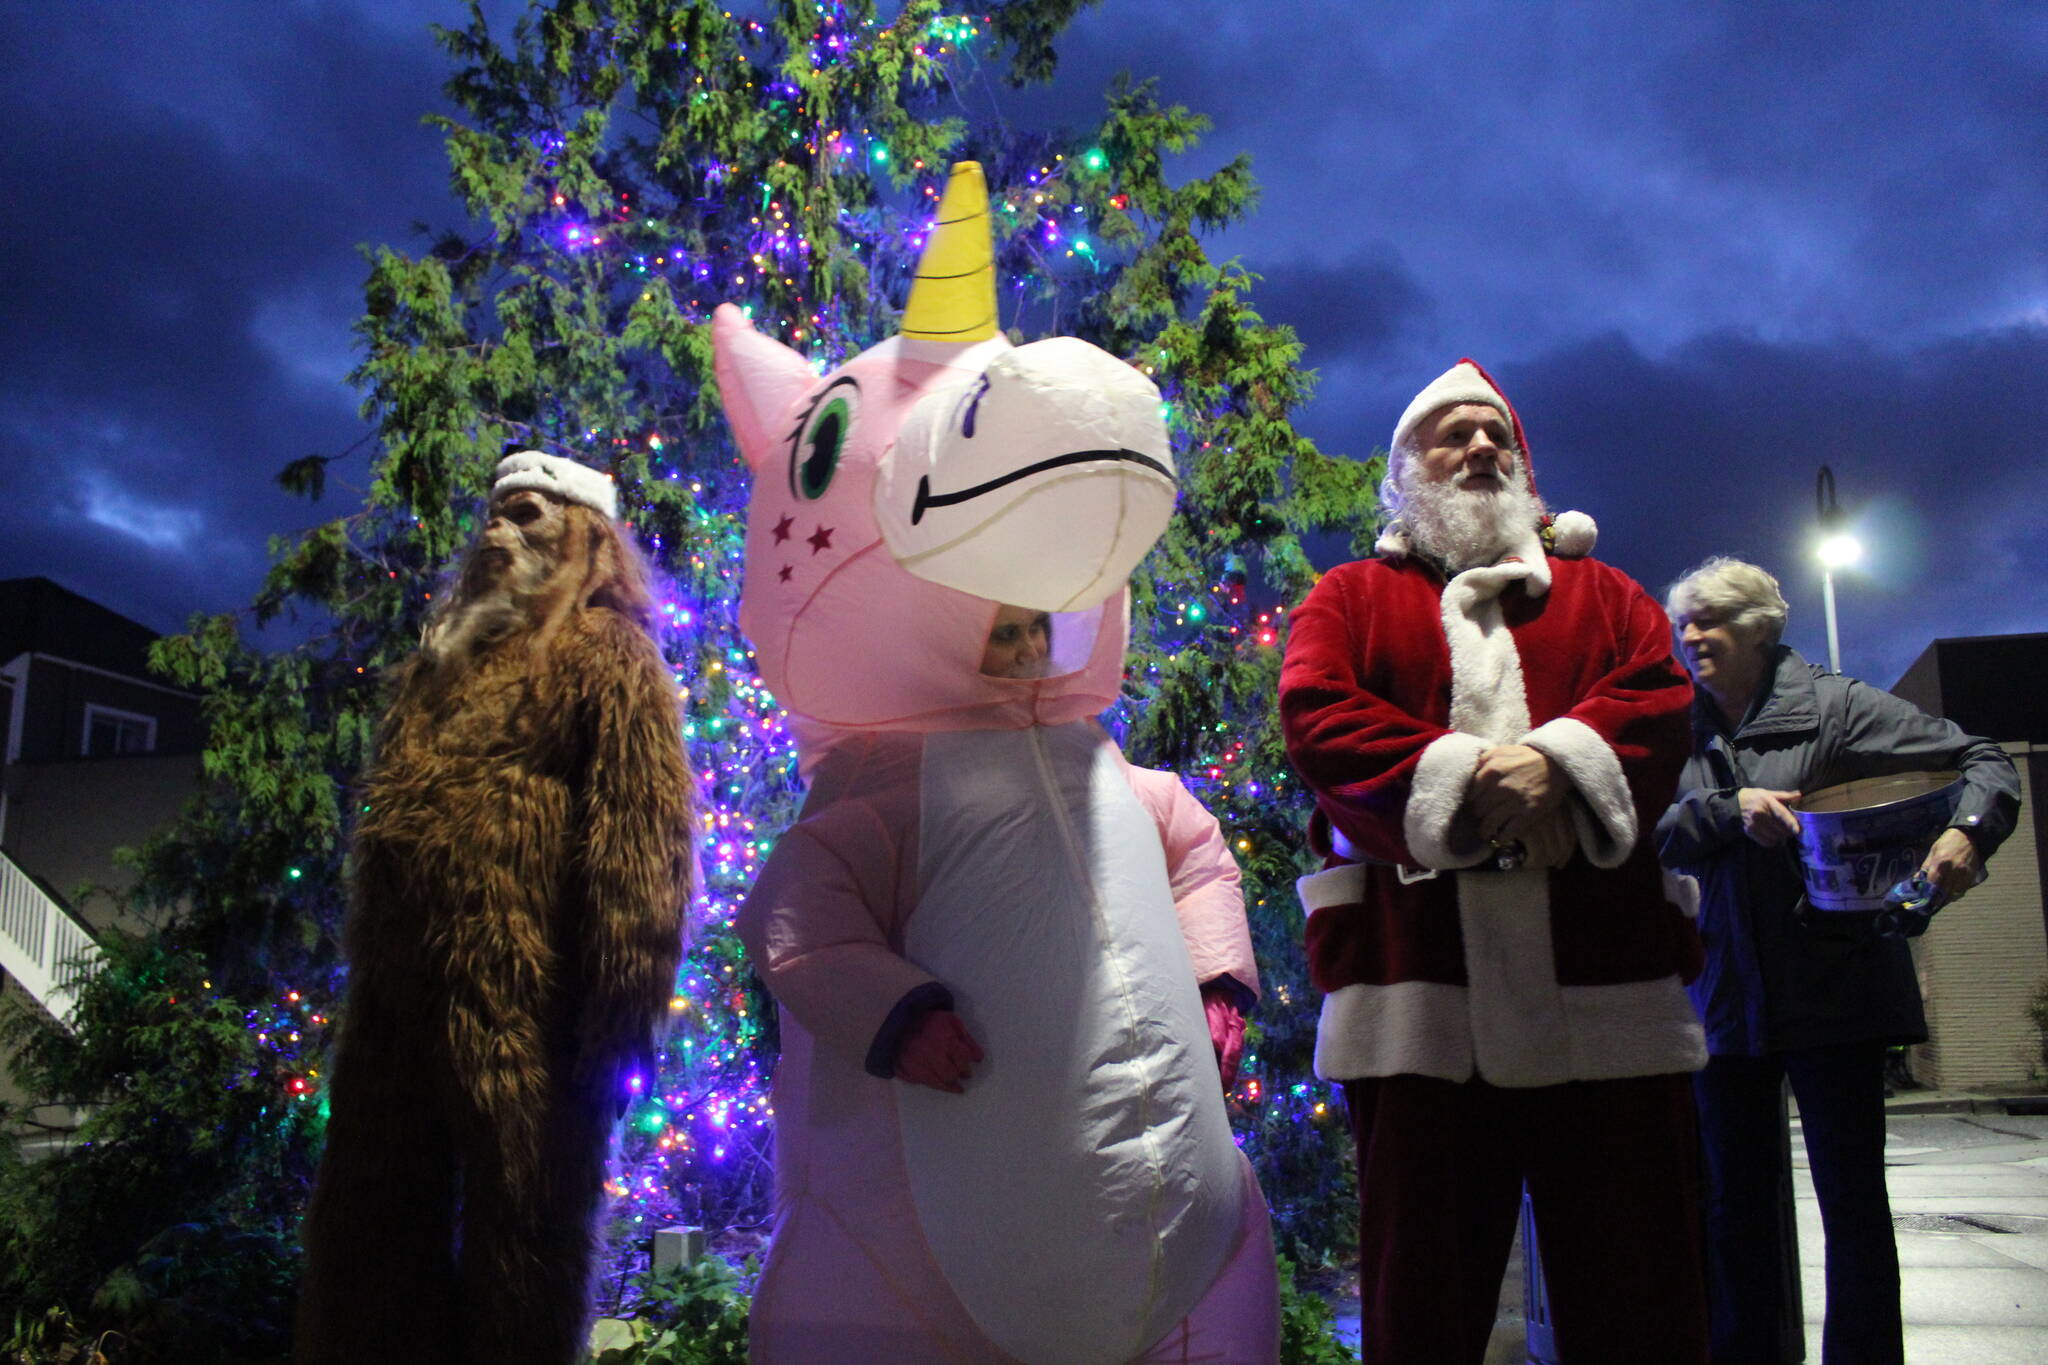 File photo by Karina Andrew/Whidbey News-Times
Some unconventional helpers join Santa at the Oak Harbor tree lighting in 2021.